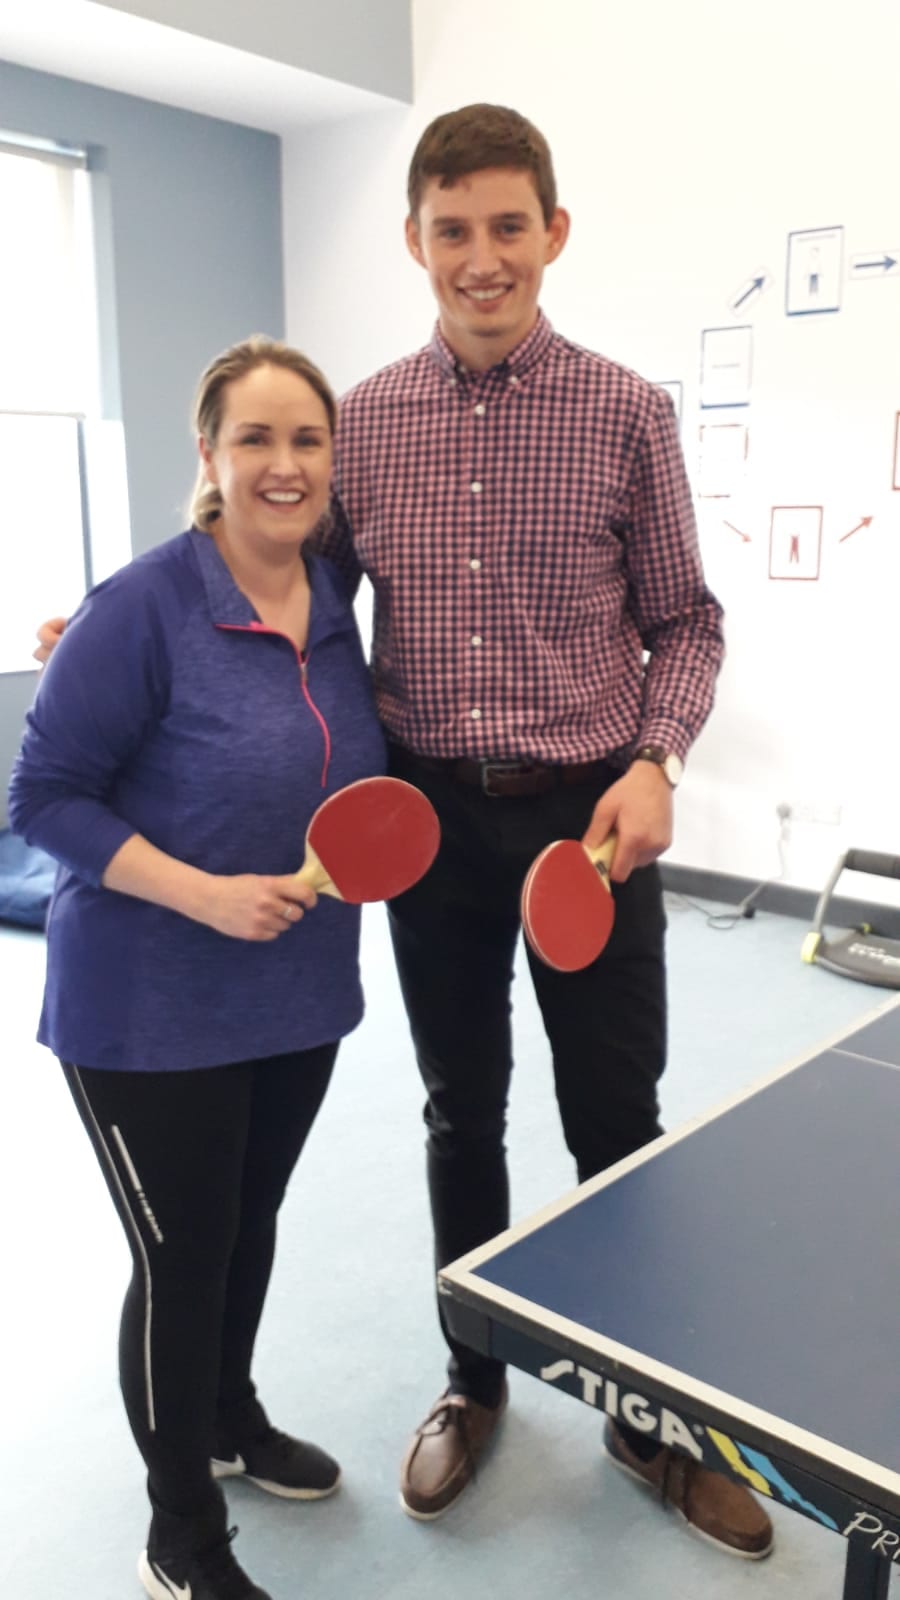 No hard feelings for Ms Creed after she was narrowly defeated by Mr Hegarty in the table tennis final